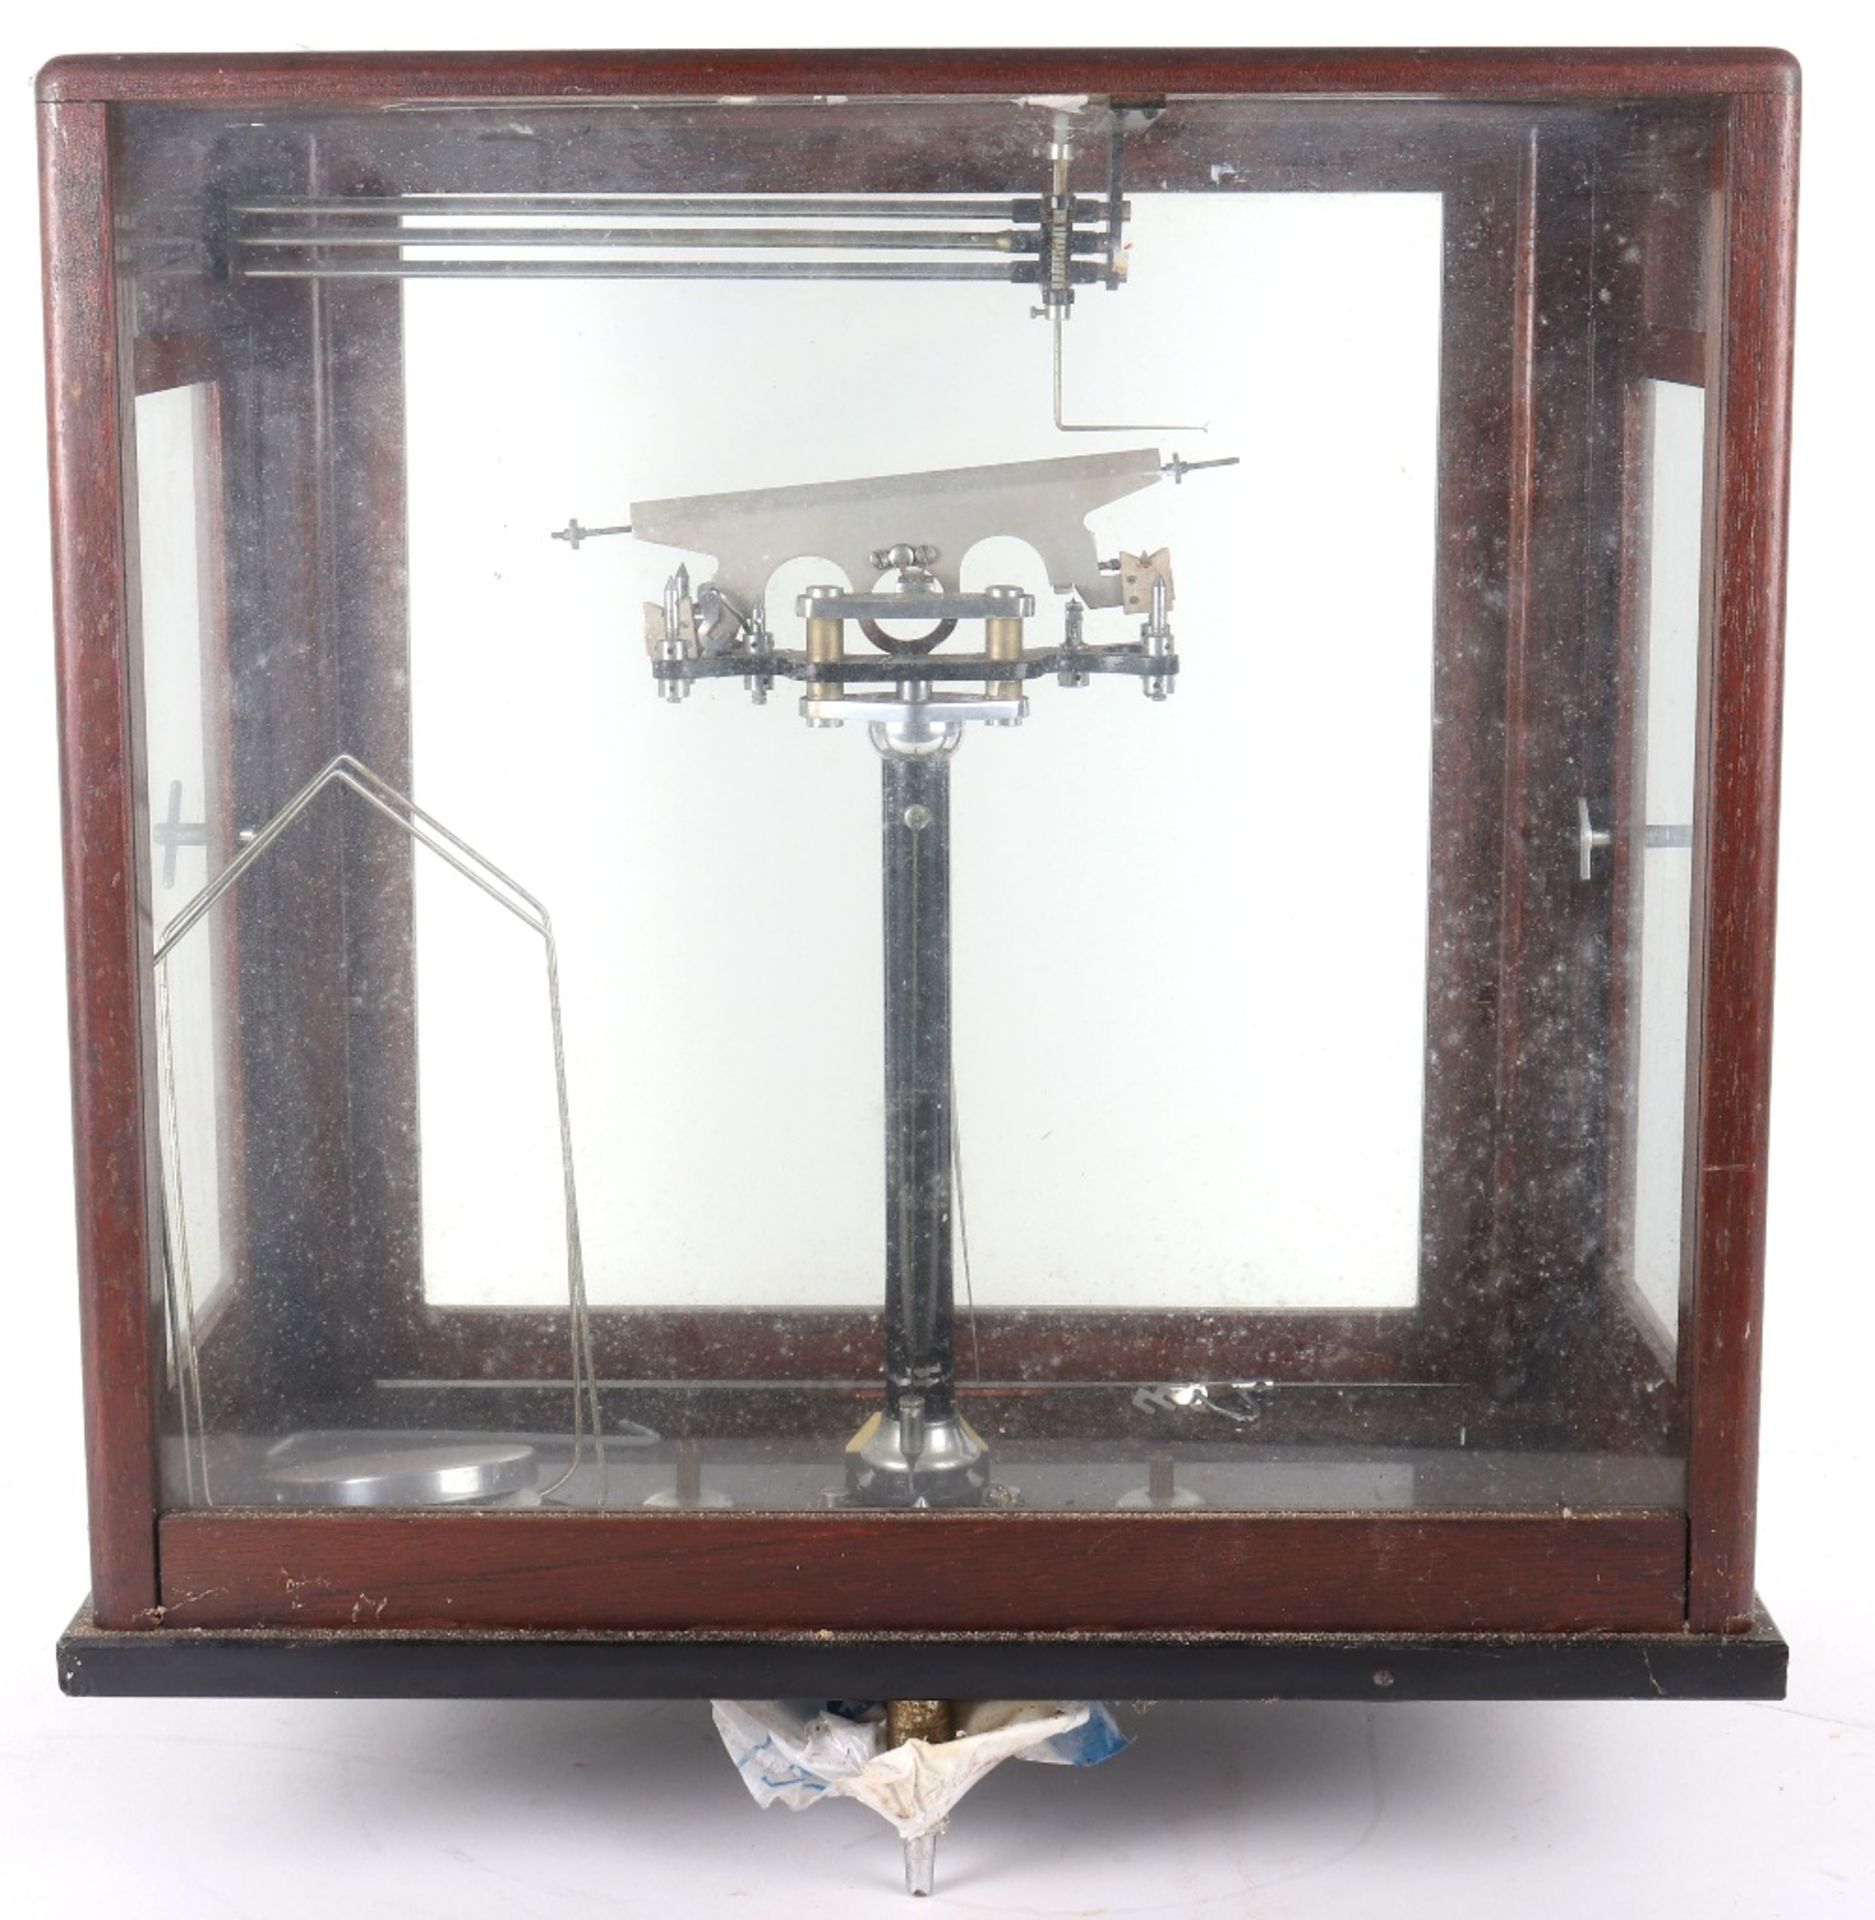 A Townson & Mercer set of scales, in glass, oak and mahogany case - Image 7 of 10